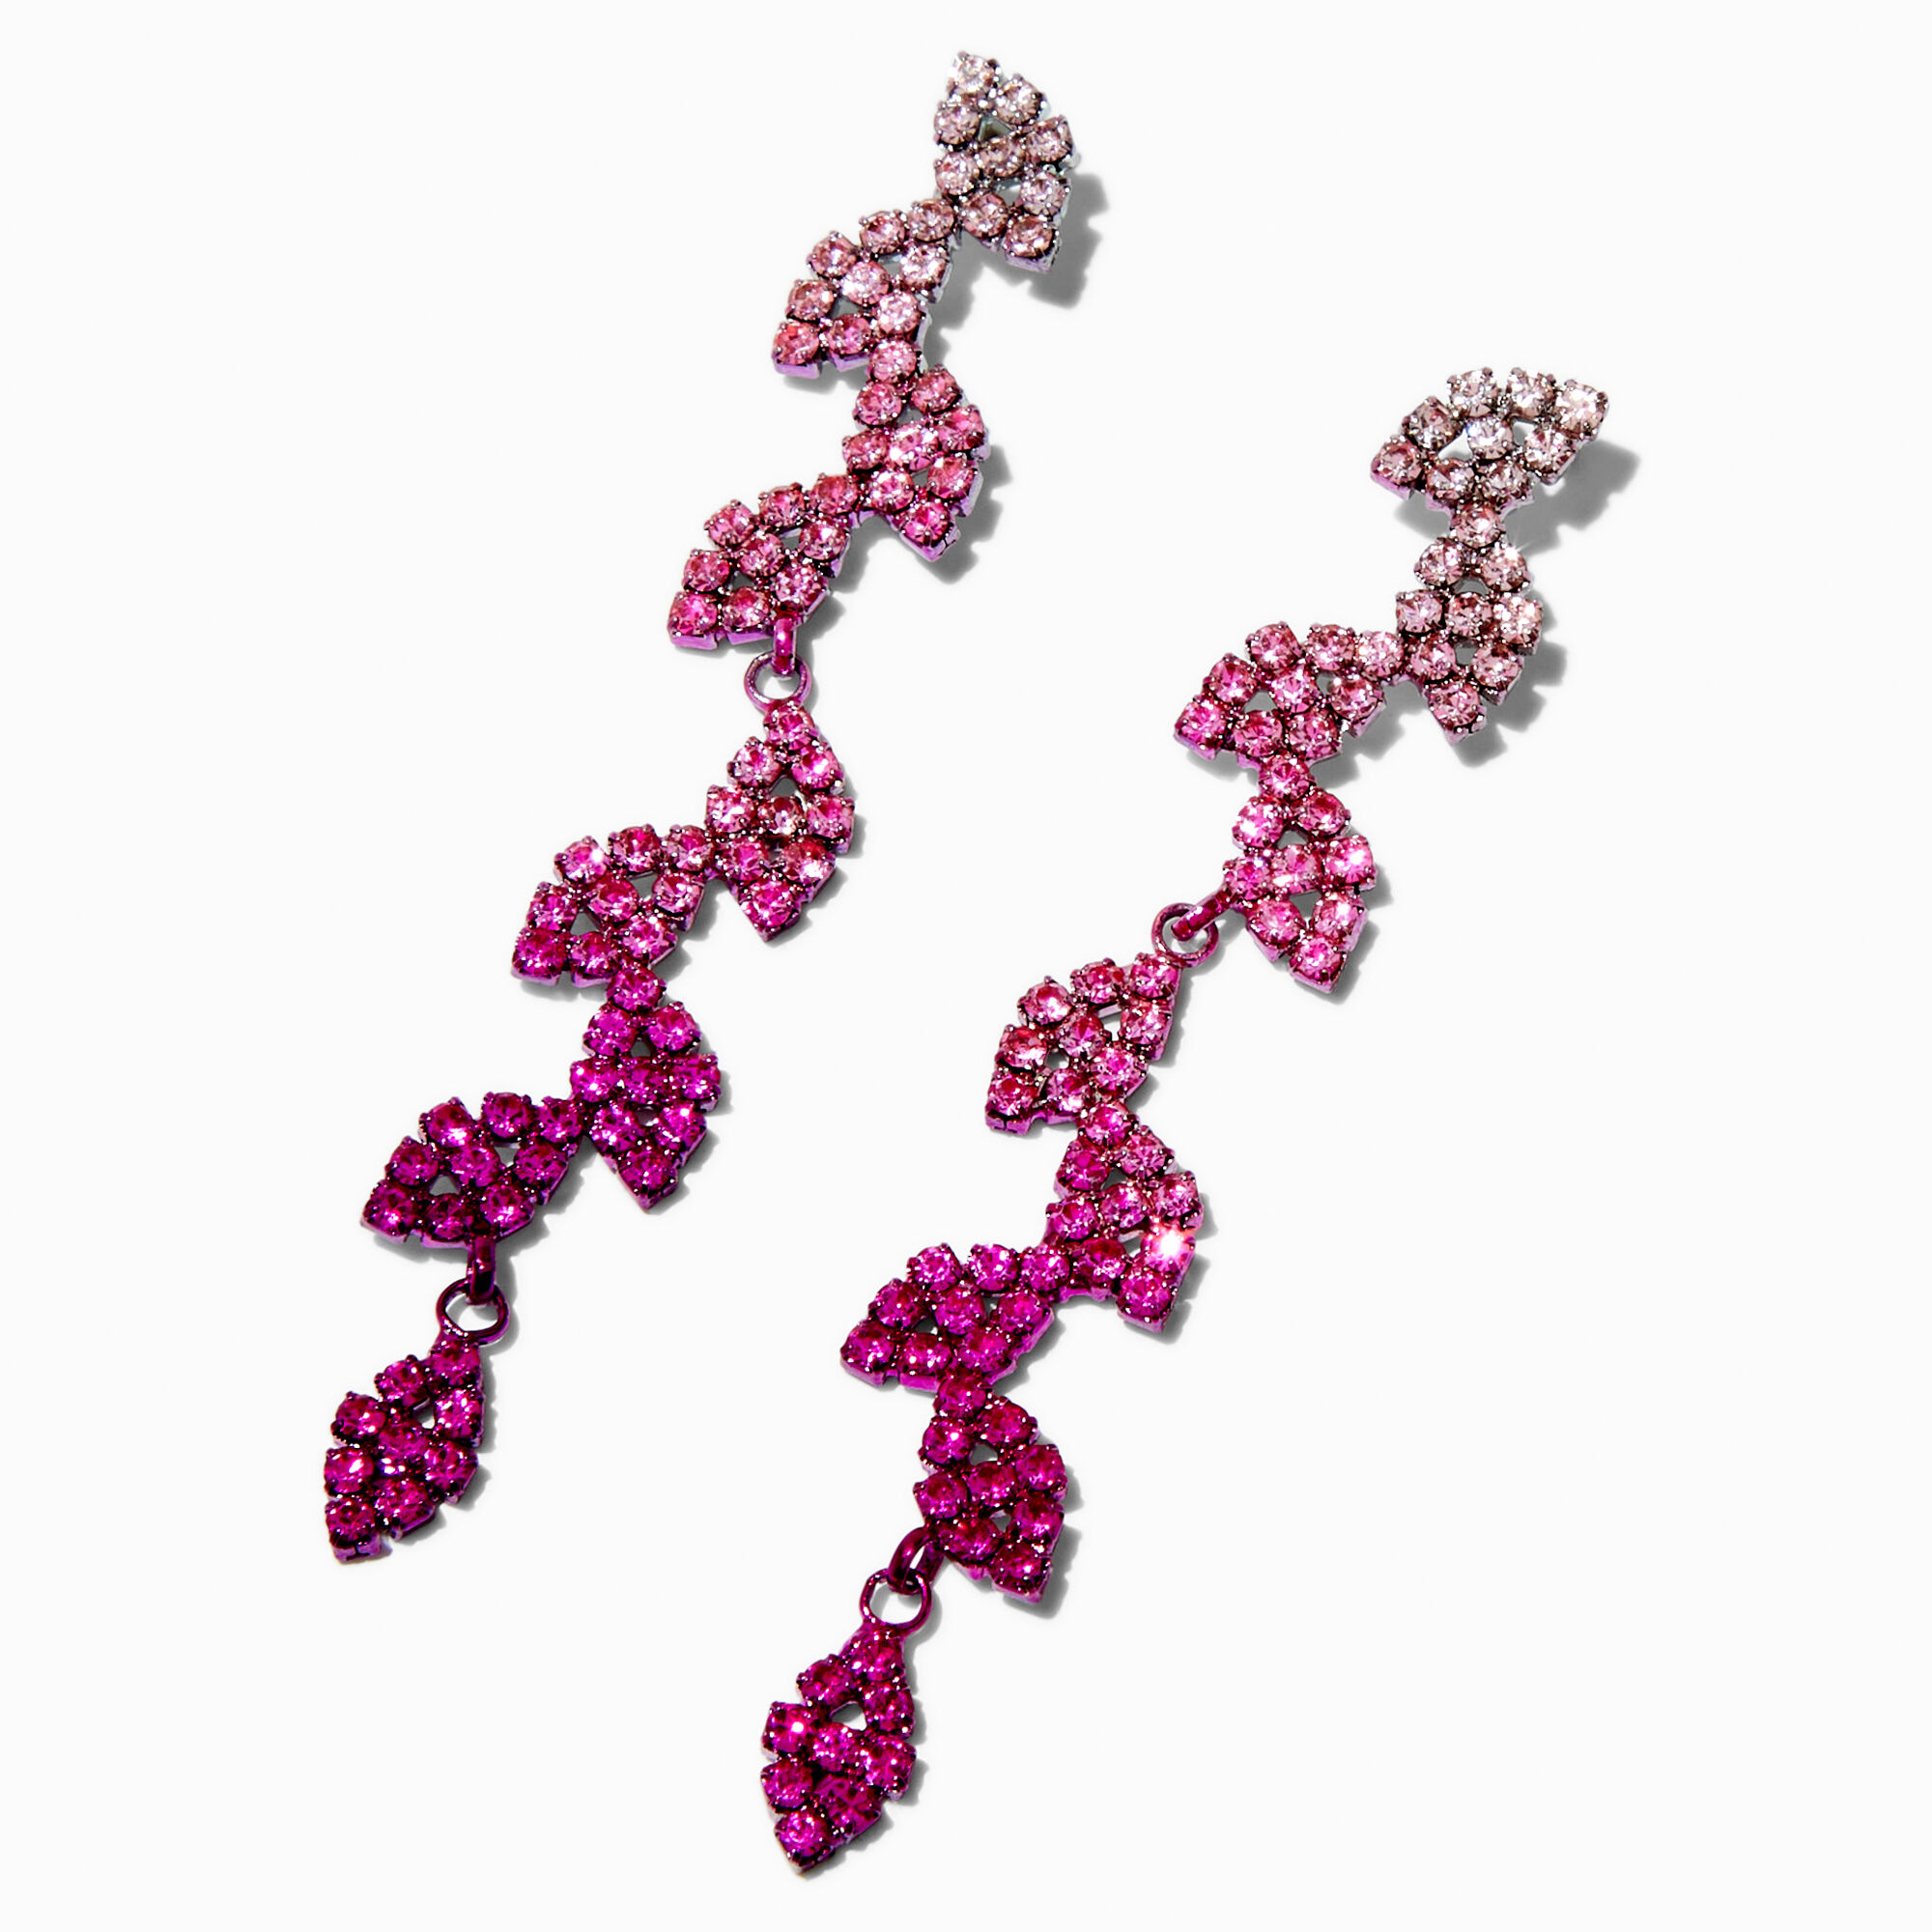 View Claires Ombre Crystal Vine 3 Drop Earrings Pink information